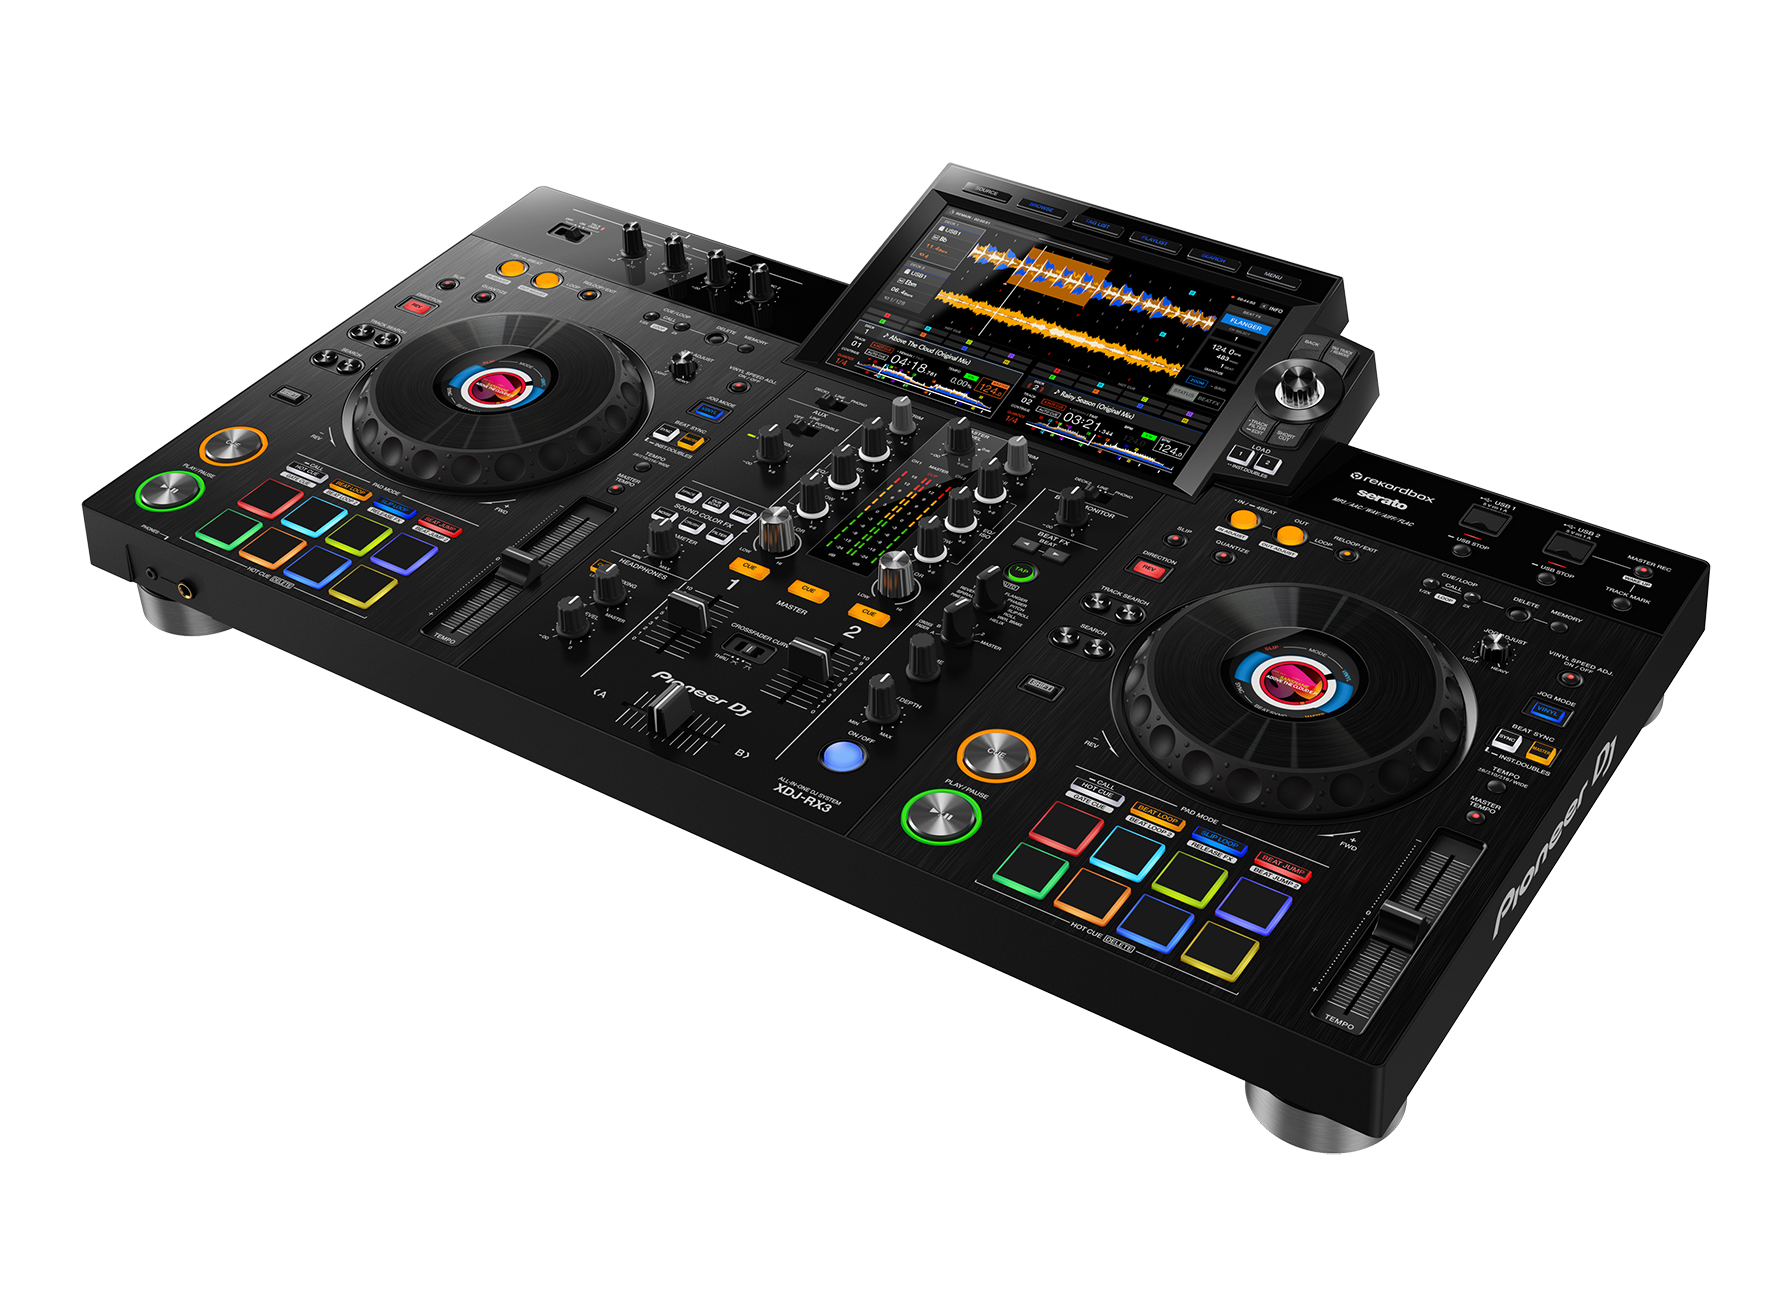 The Pioneer XDJ-RX3 has landed and it's a beast!